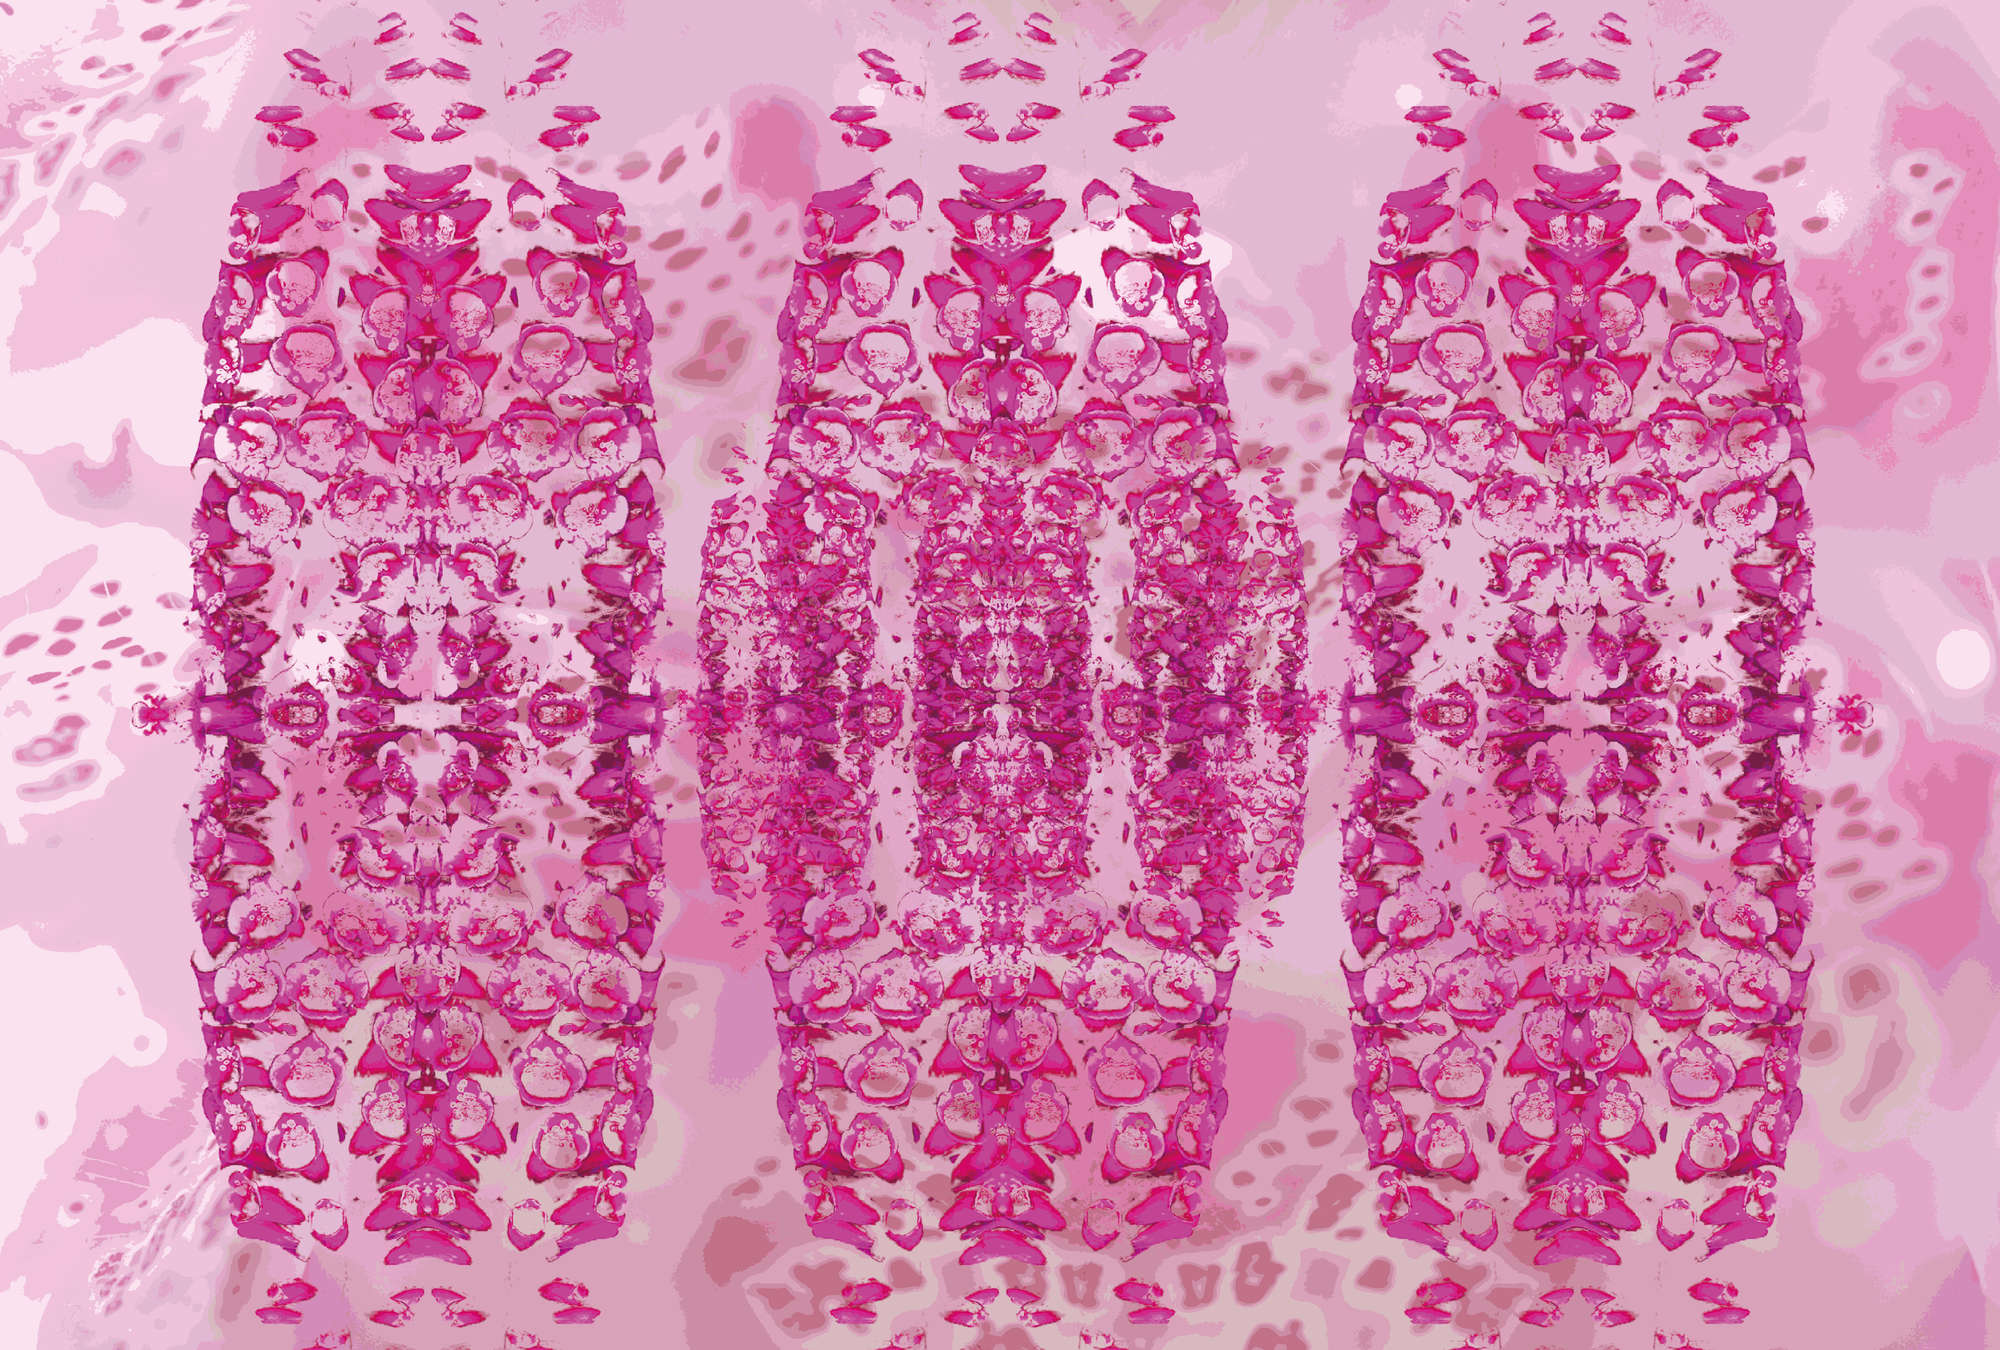             Photo wallpaper pink design with abstract pattern
        